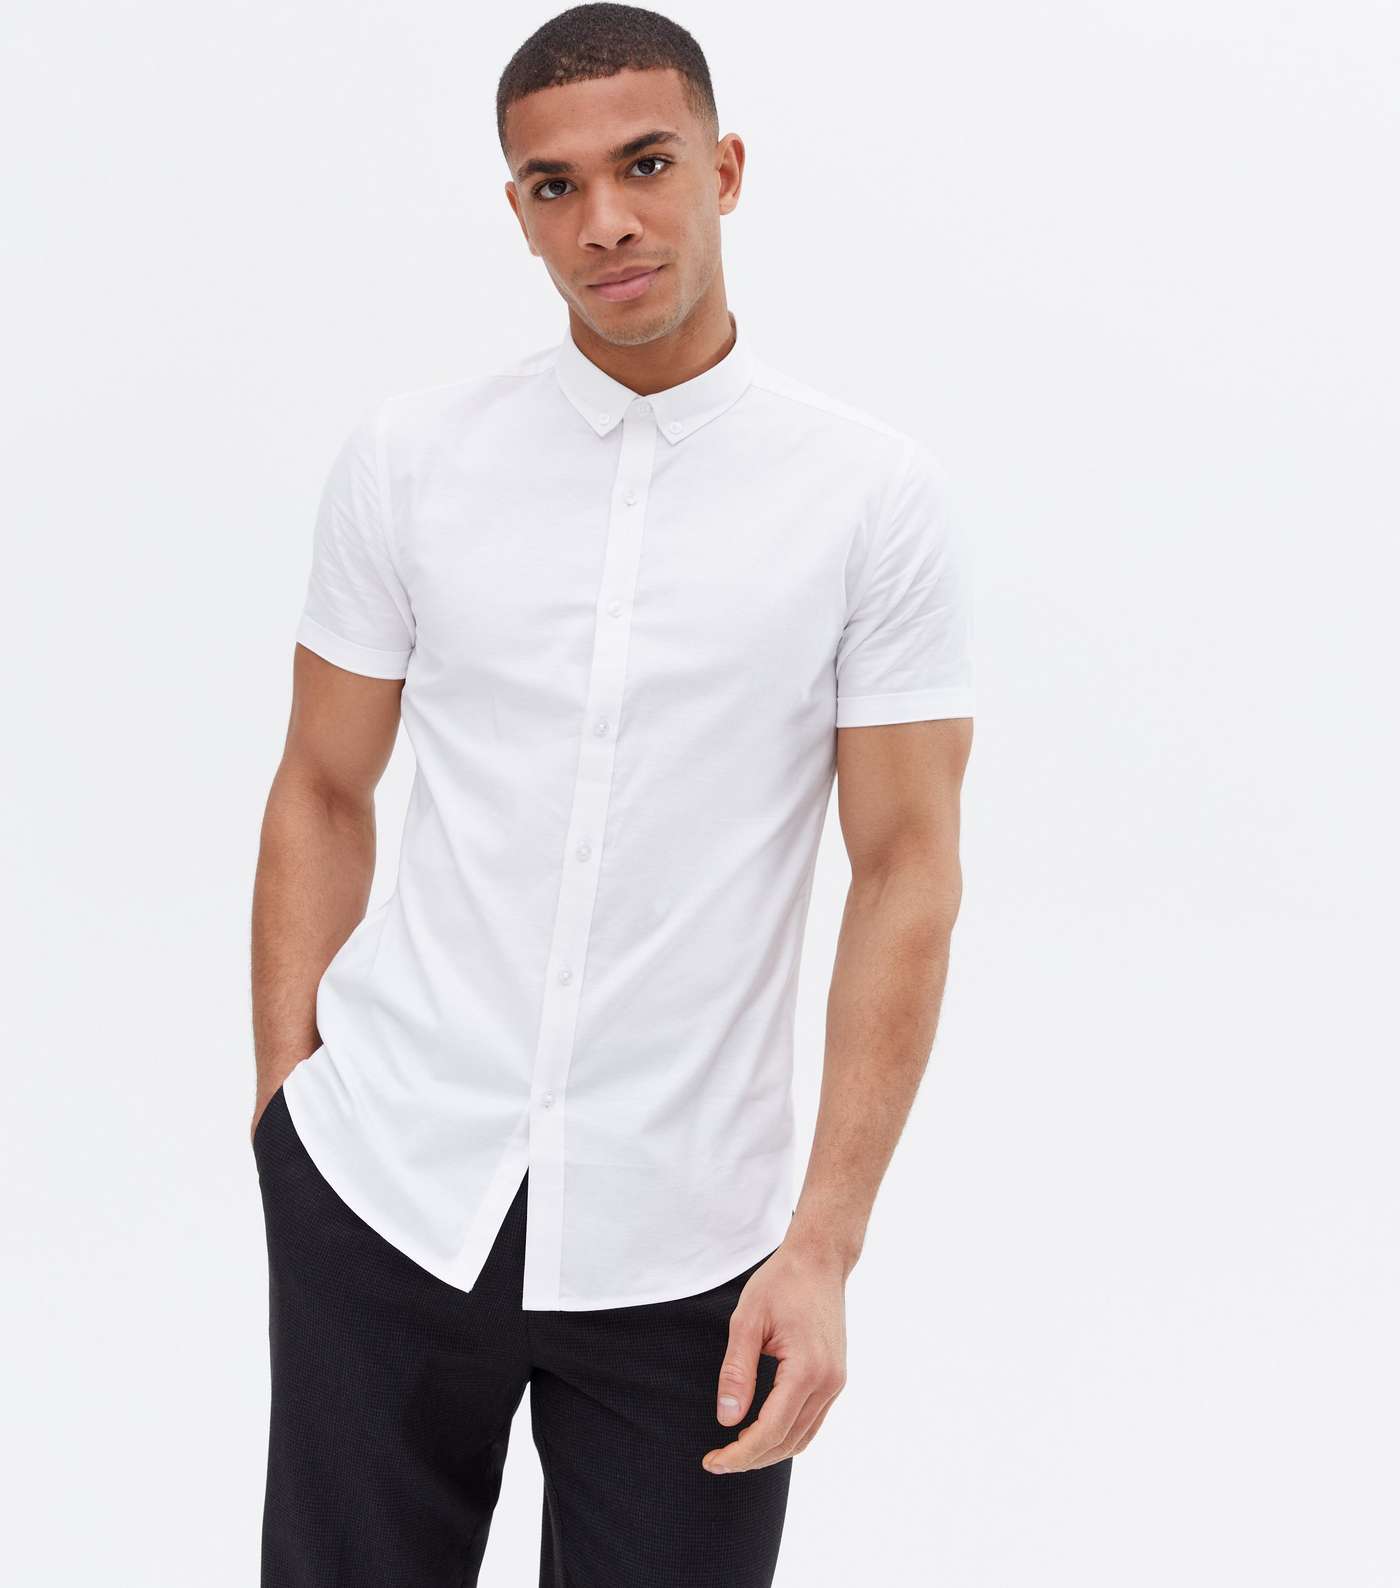 White Muscle Fit Oxford Shirt